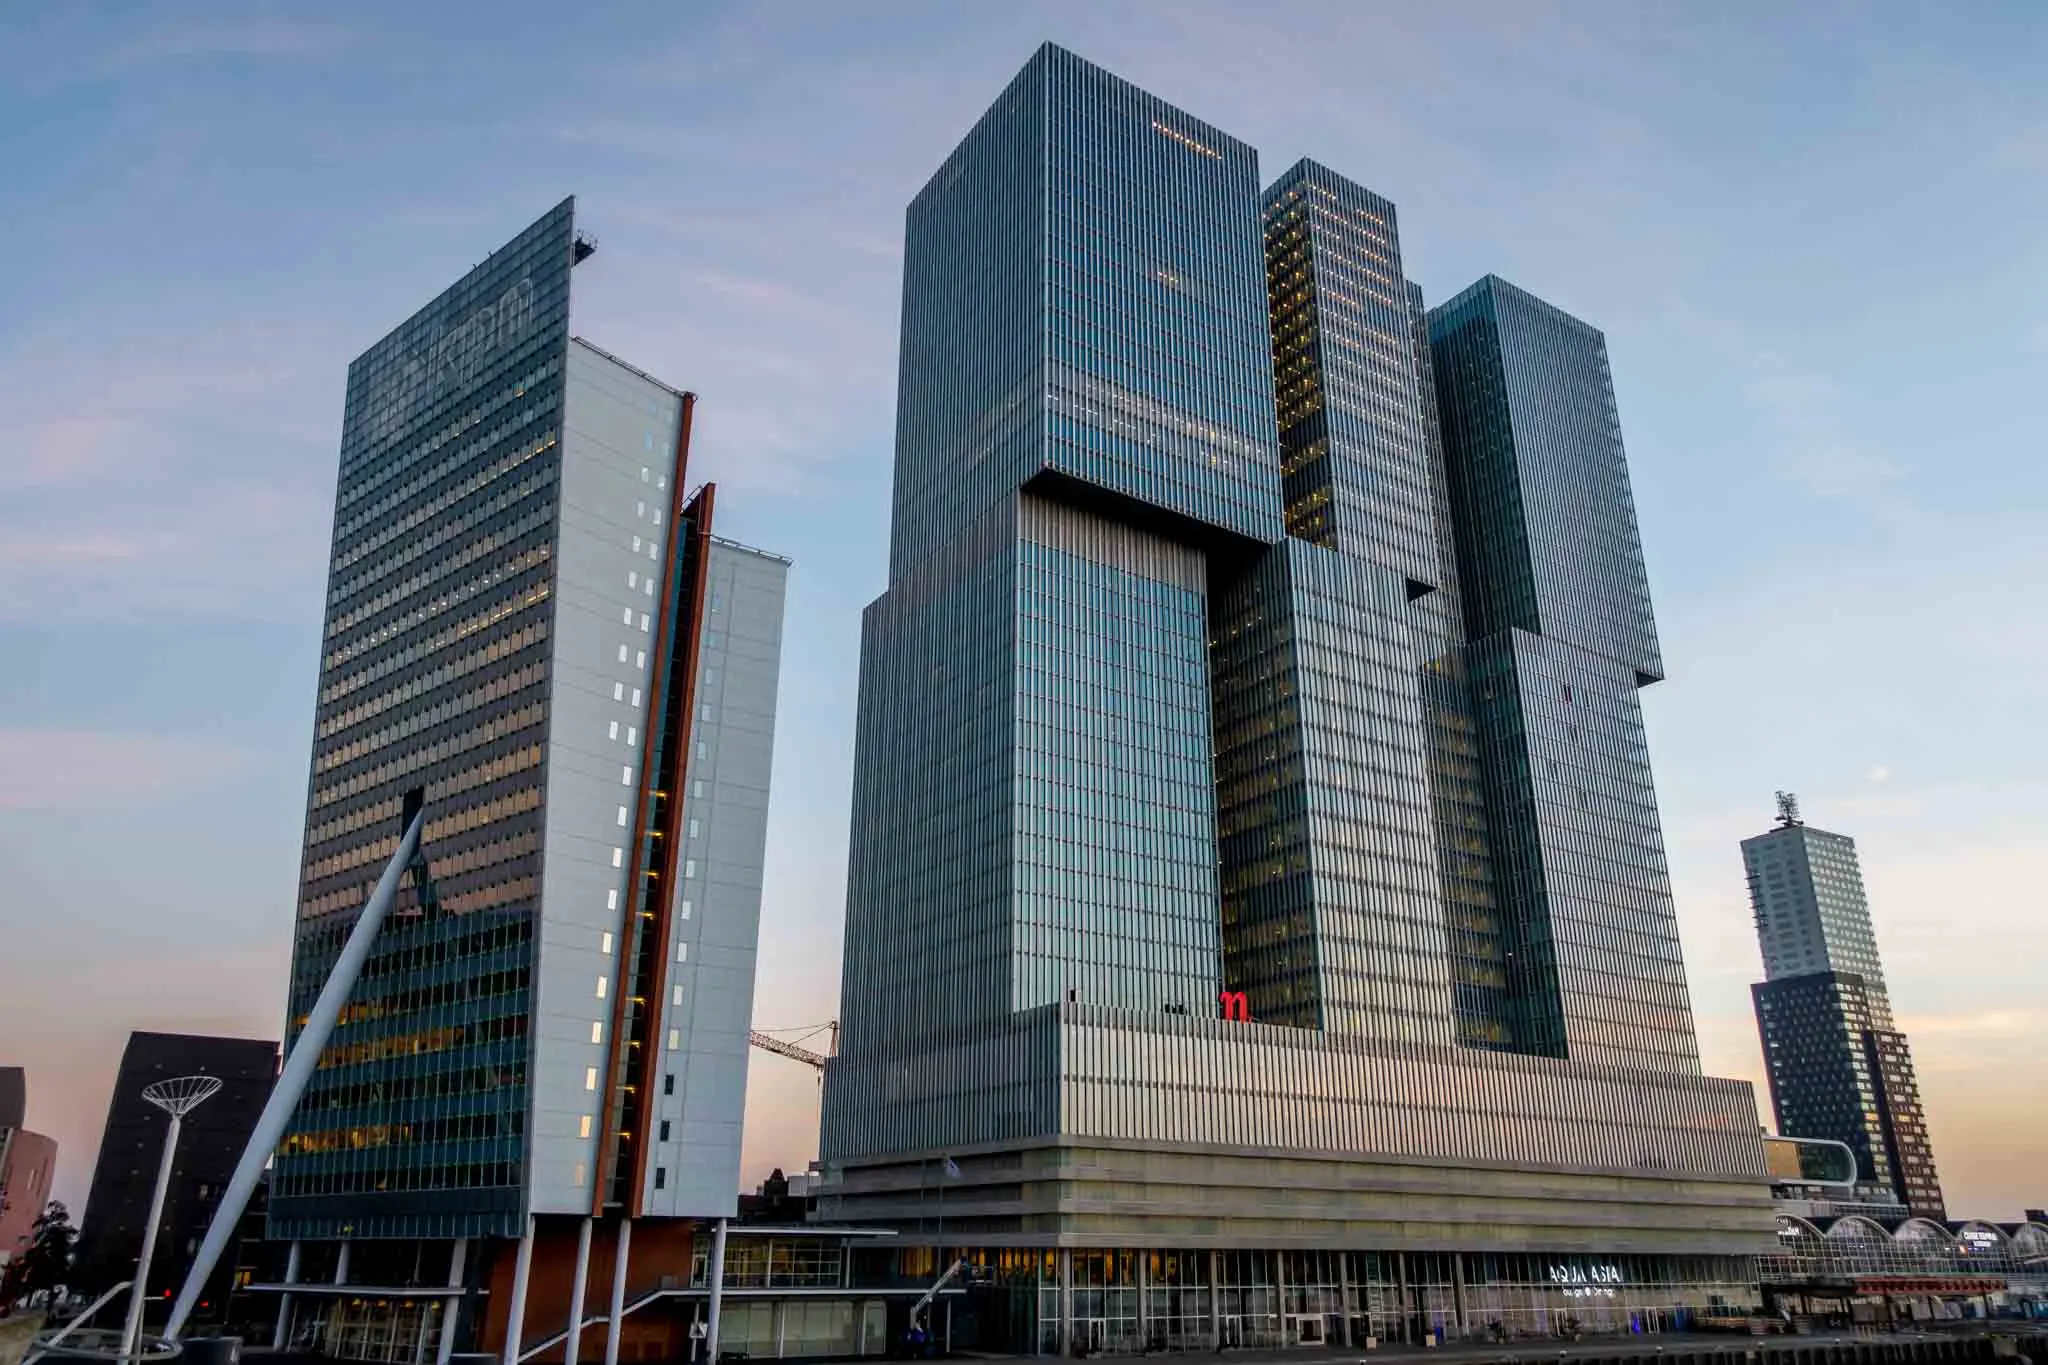 The tangled, gray towers of the De Rotterdam building in Rotterdam 